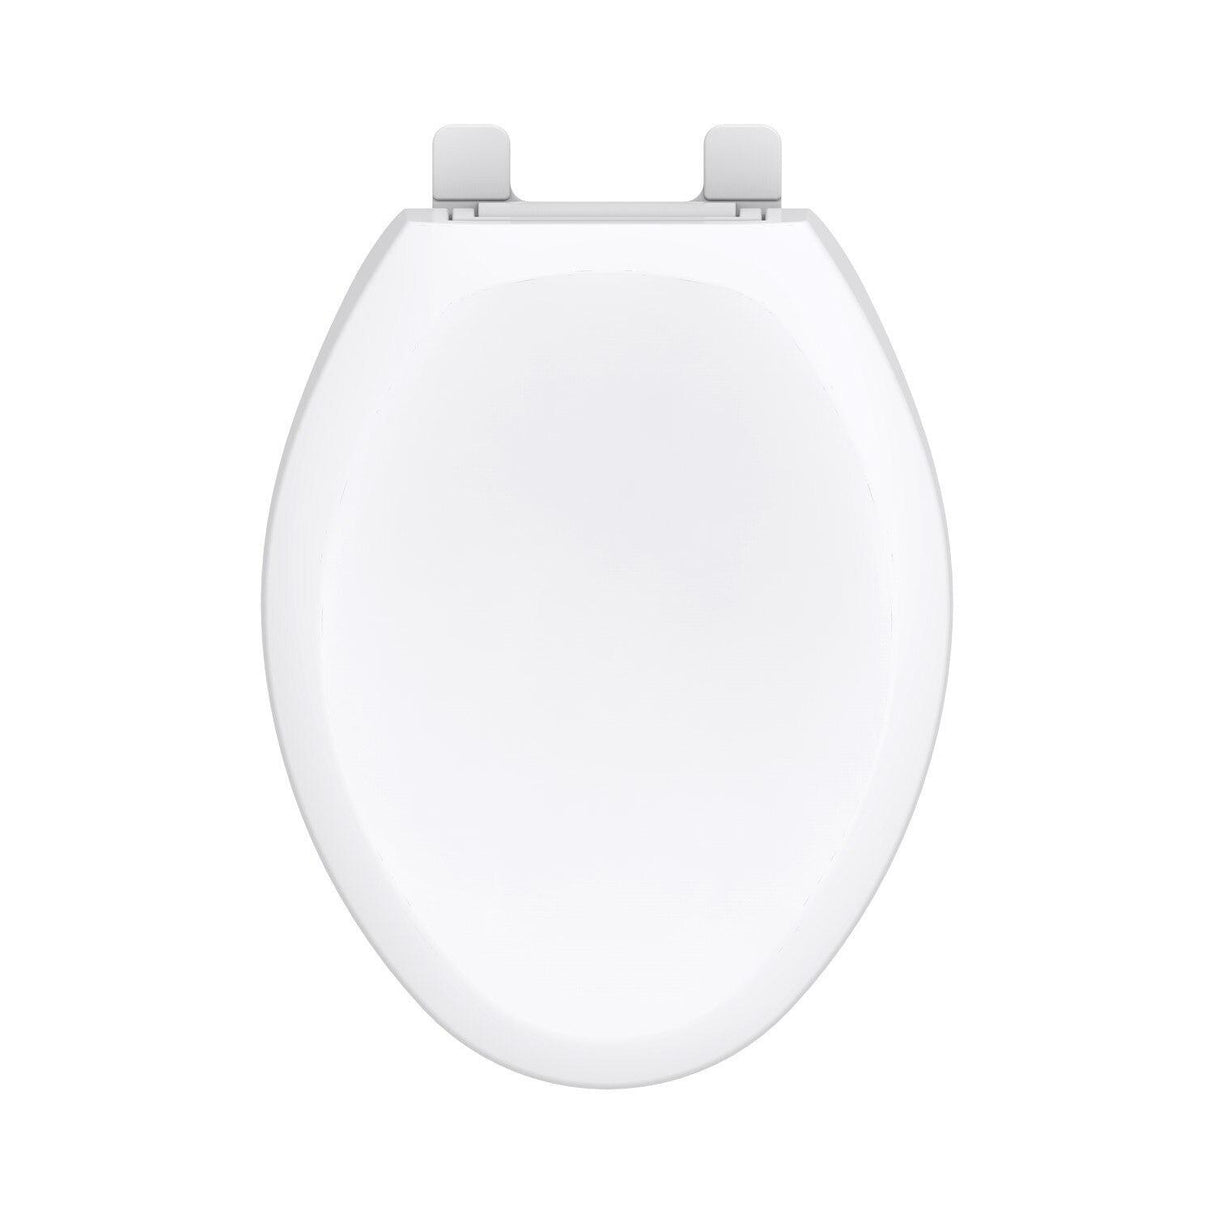 Gerber G009921325 Bone Adjustable Slow Close Elongated Toilet Seat With Cover